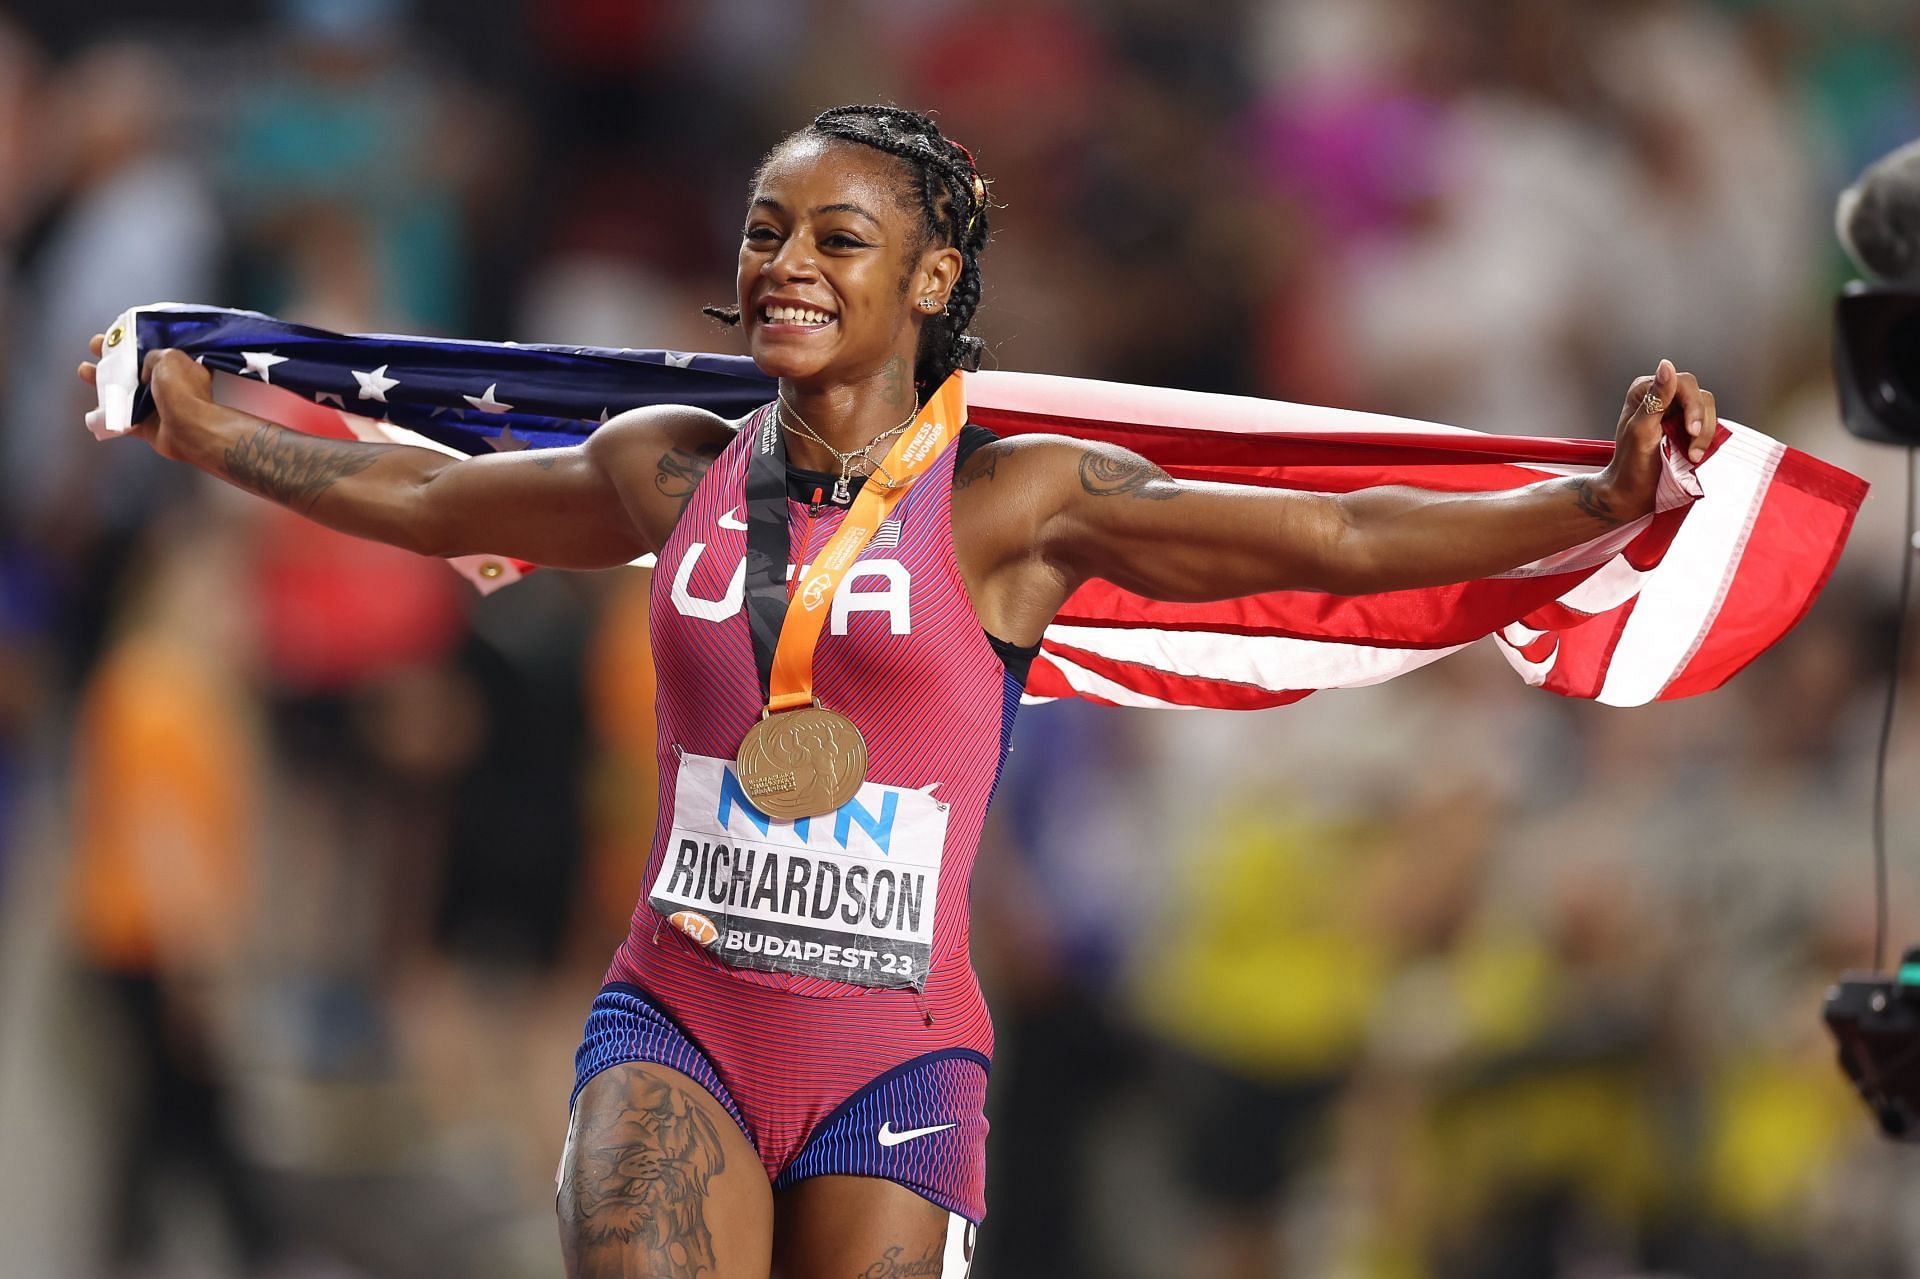 Sha&#039;Carri Richardson of Team United States celebrates winning the Women&#039;s 100m Final during the World Athletics Championships 2023 at the National Athletics Centre in Budapest, Hungary.